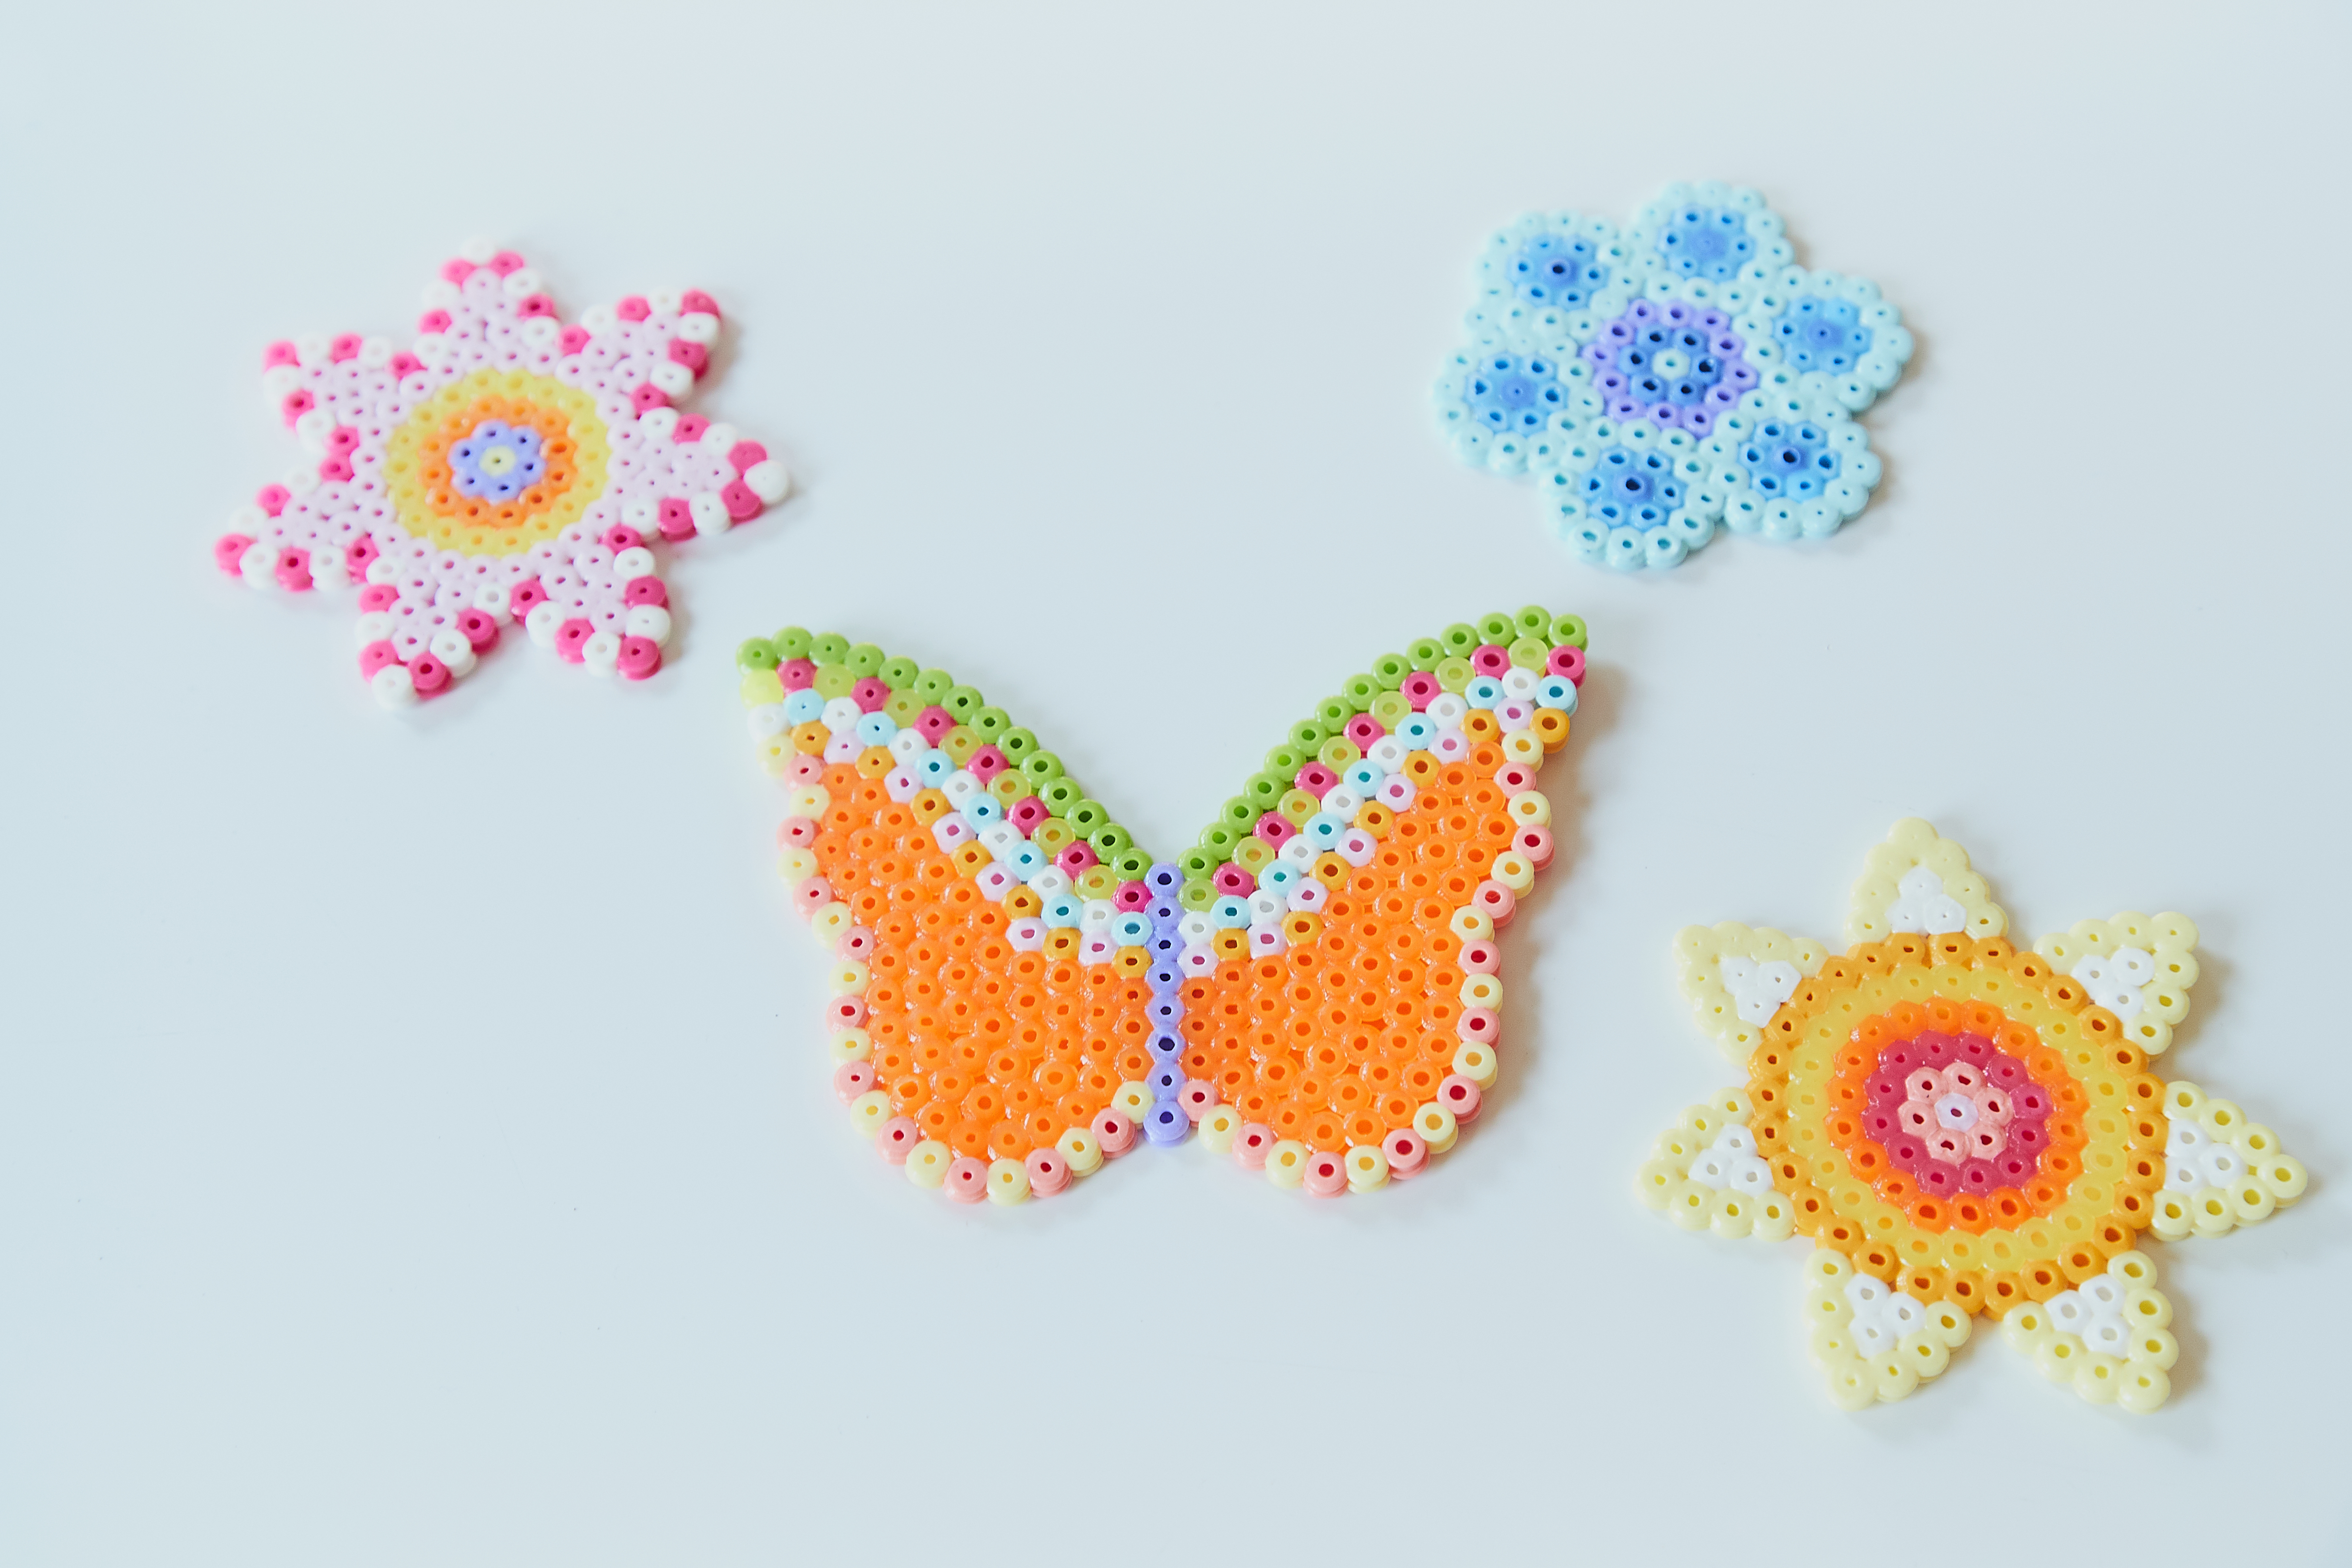 Spring Melty Bead Shapes - Craft Project Ideas